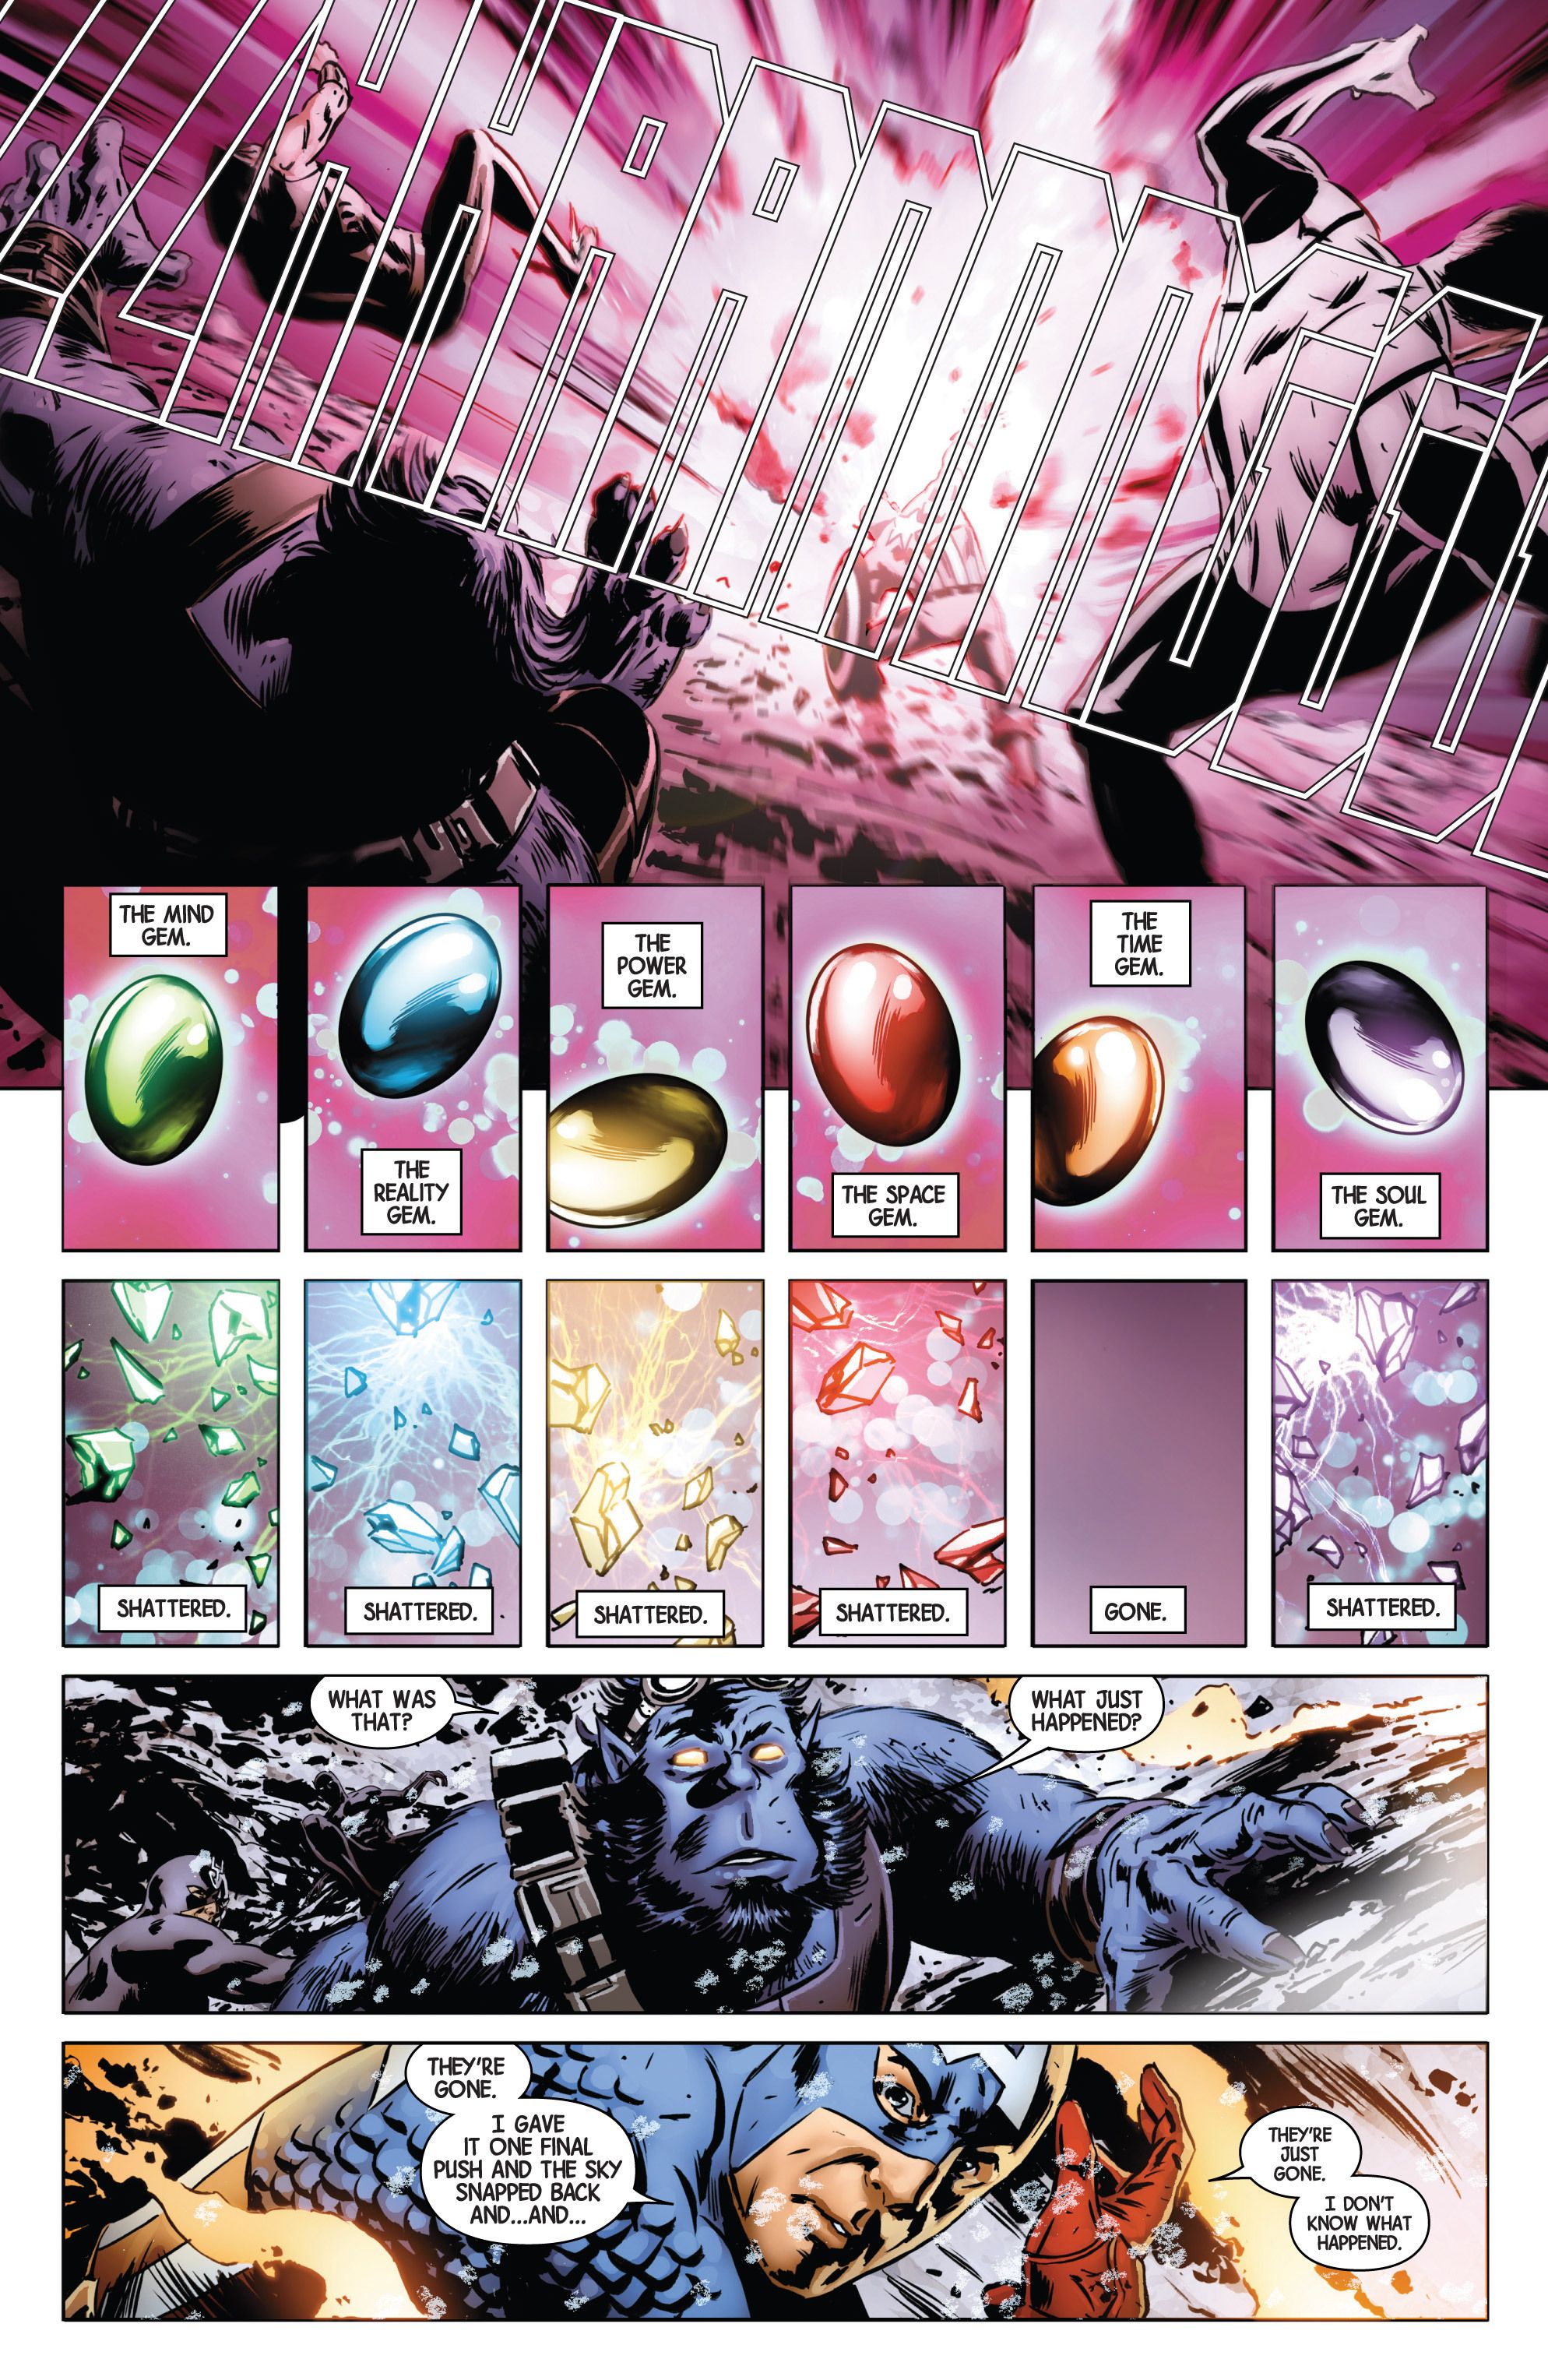 Captain America Destroyed The Infinity Stones in Comics (And Forgot It)